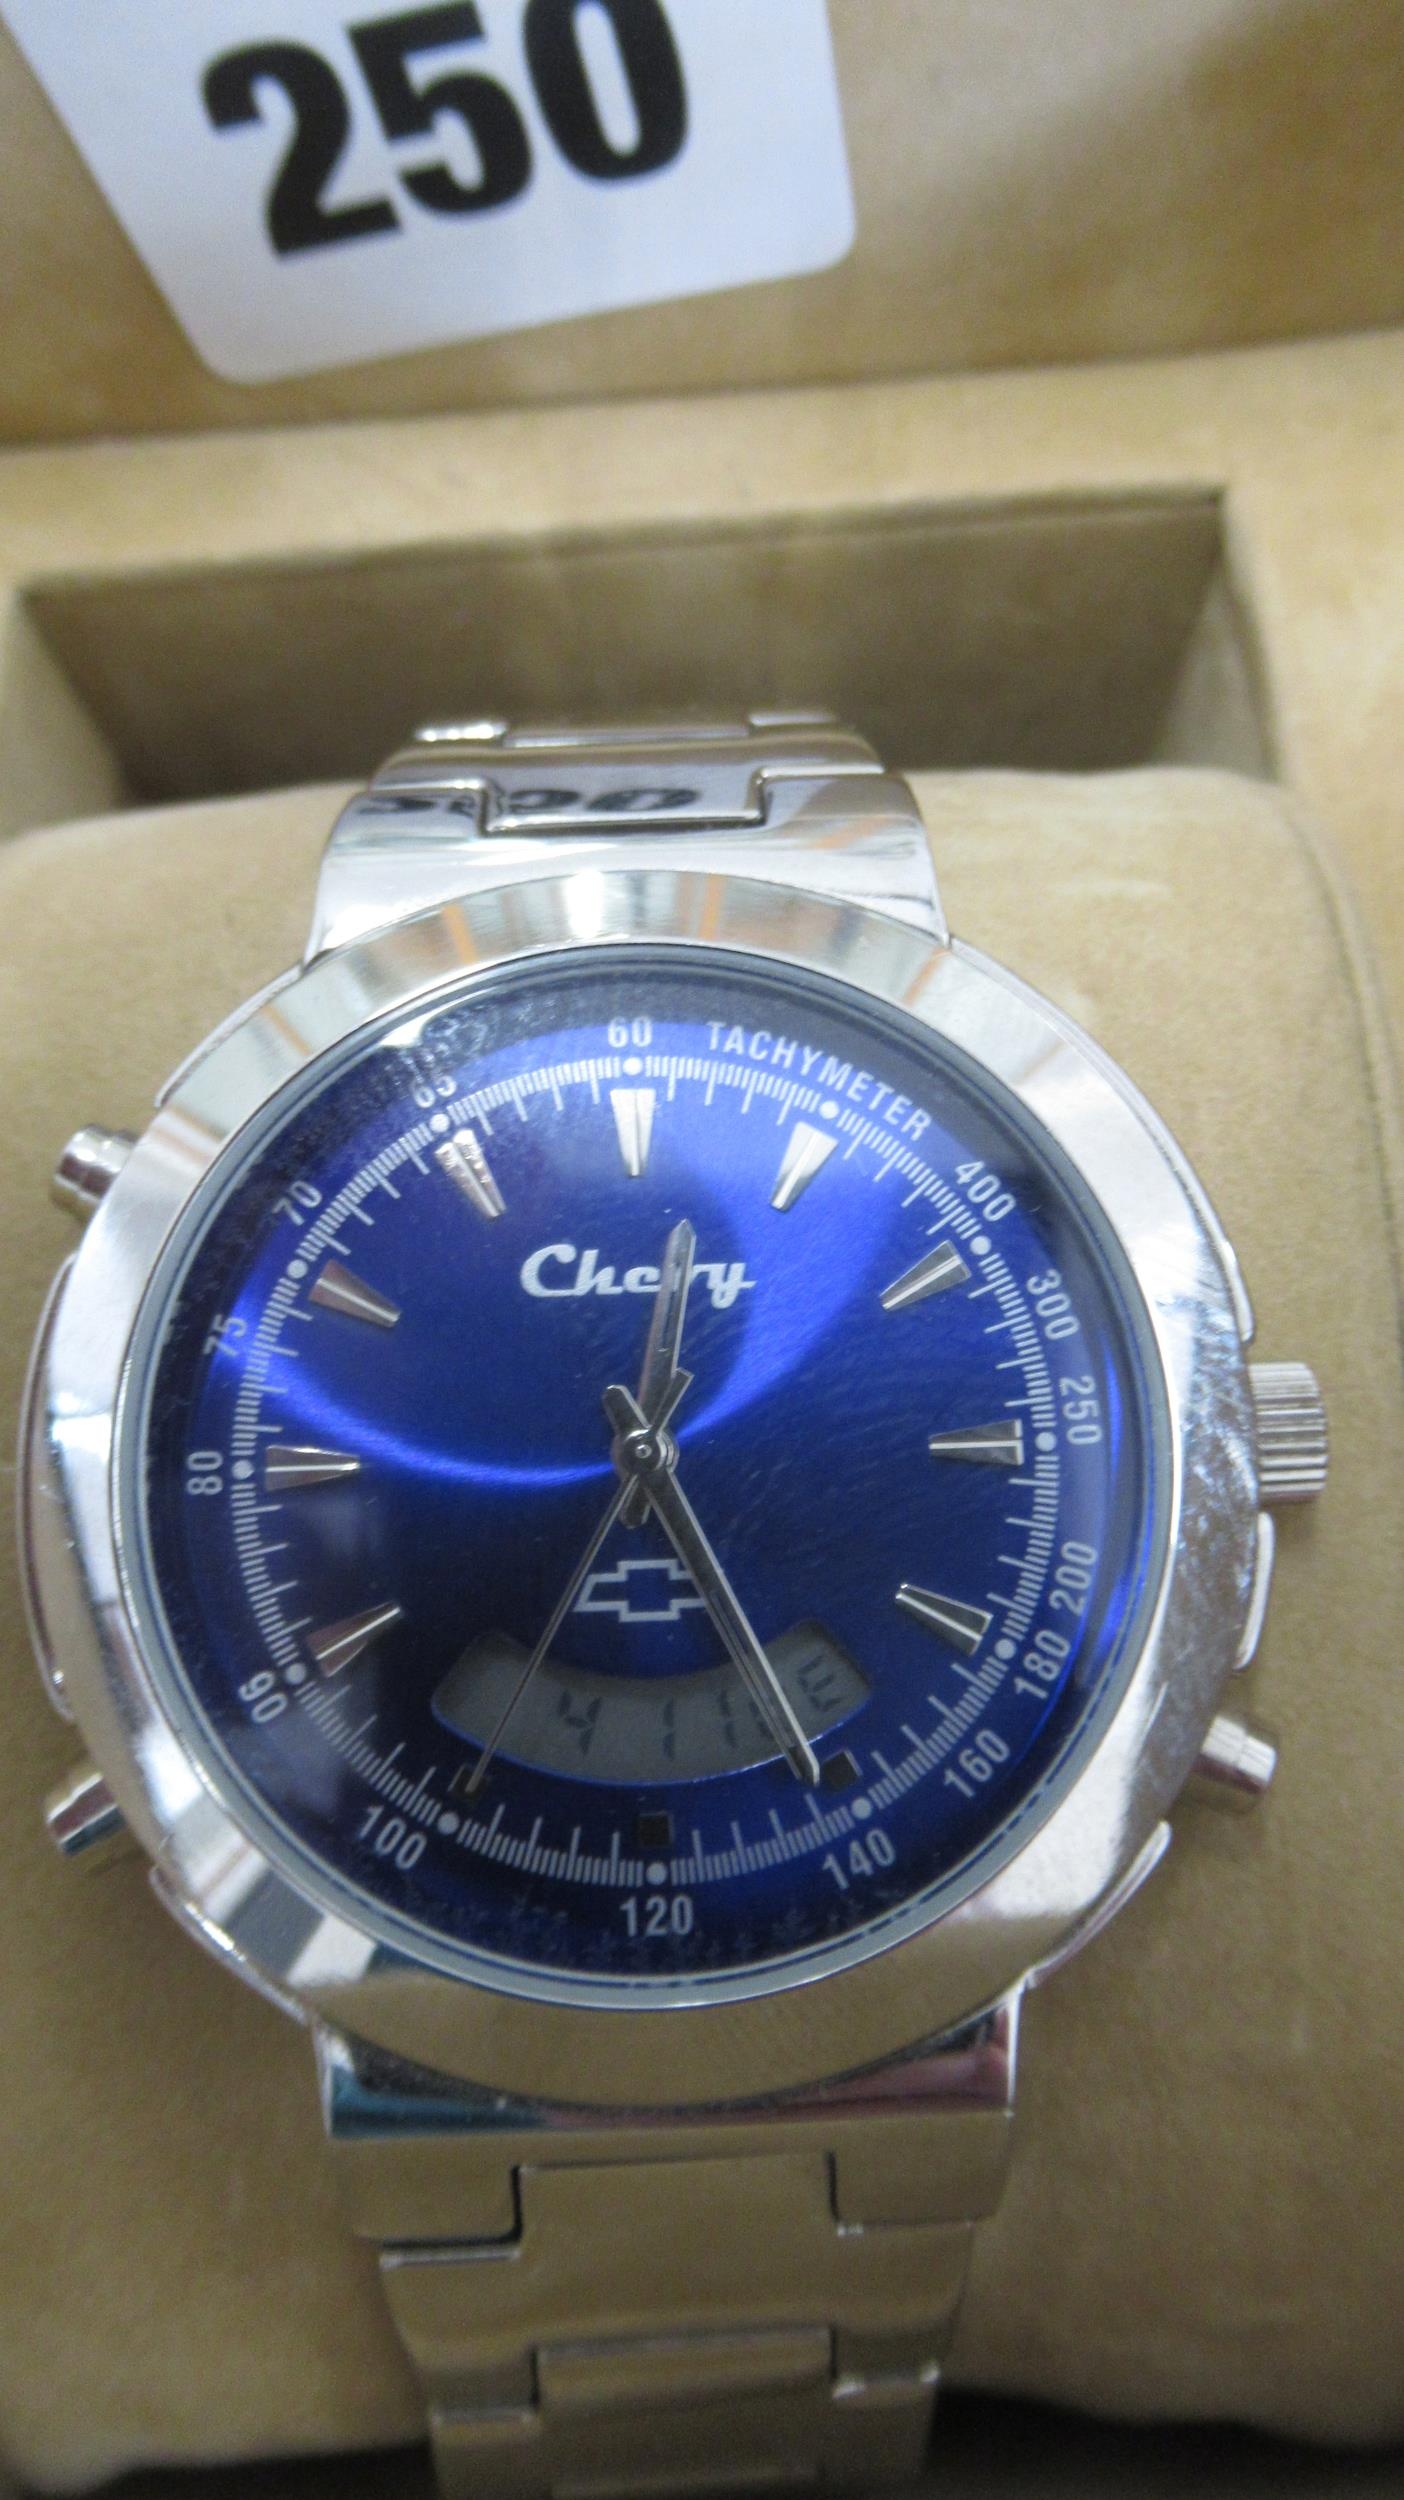 A Chevrolet stainless steel watch, Tachymeter - 40mm crown - in working order